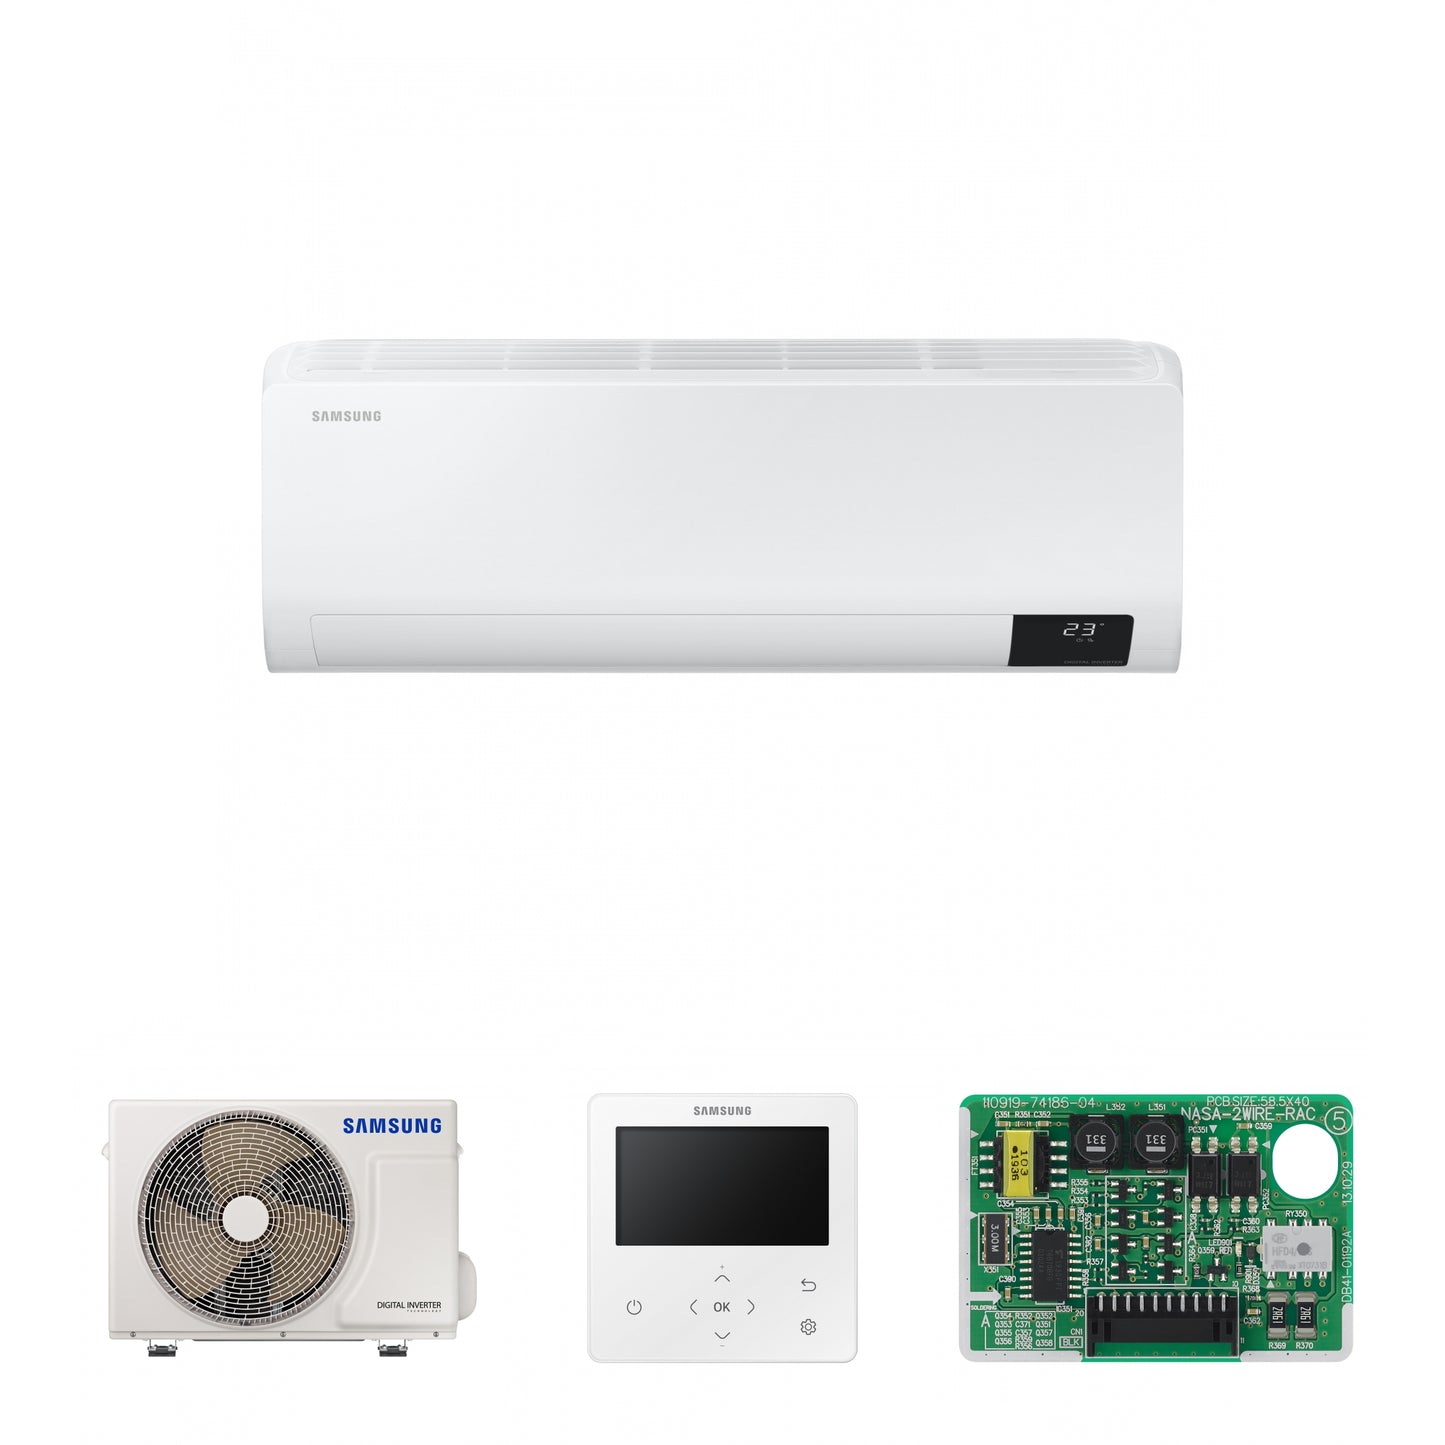 Samsung RAC Luzon 1, 3.5kW Wall mounted with colour premium wired controller